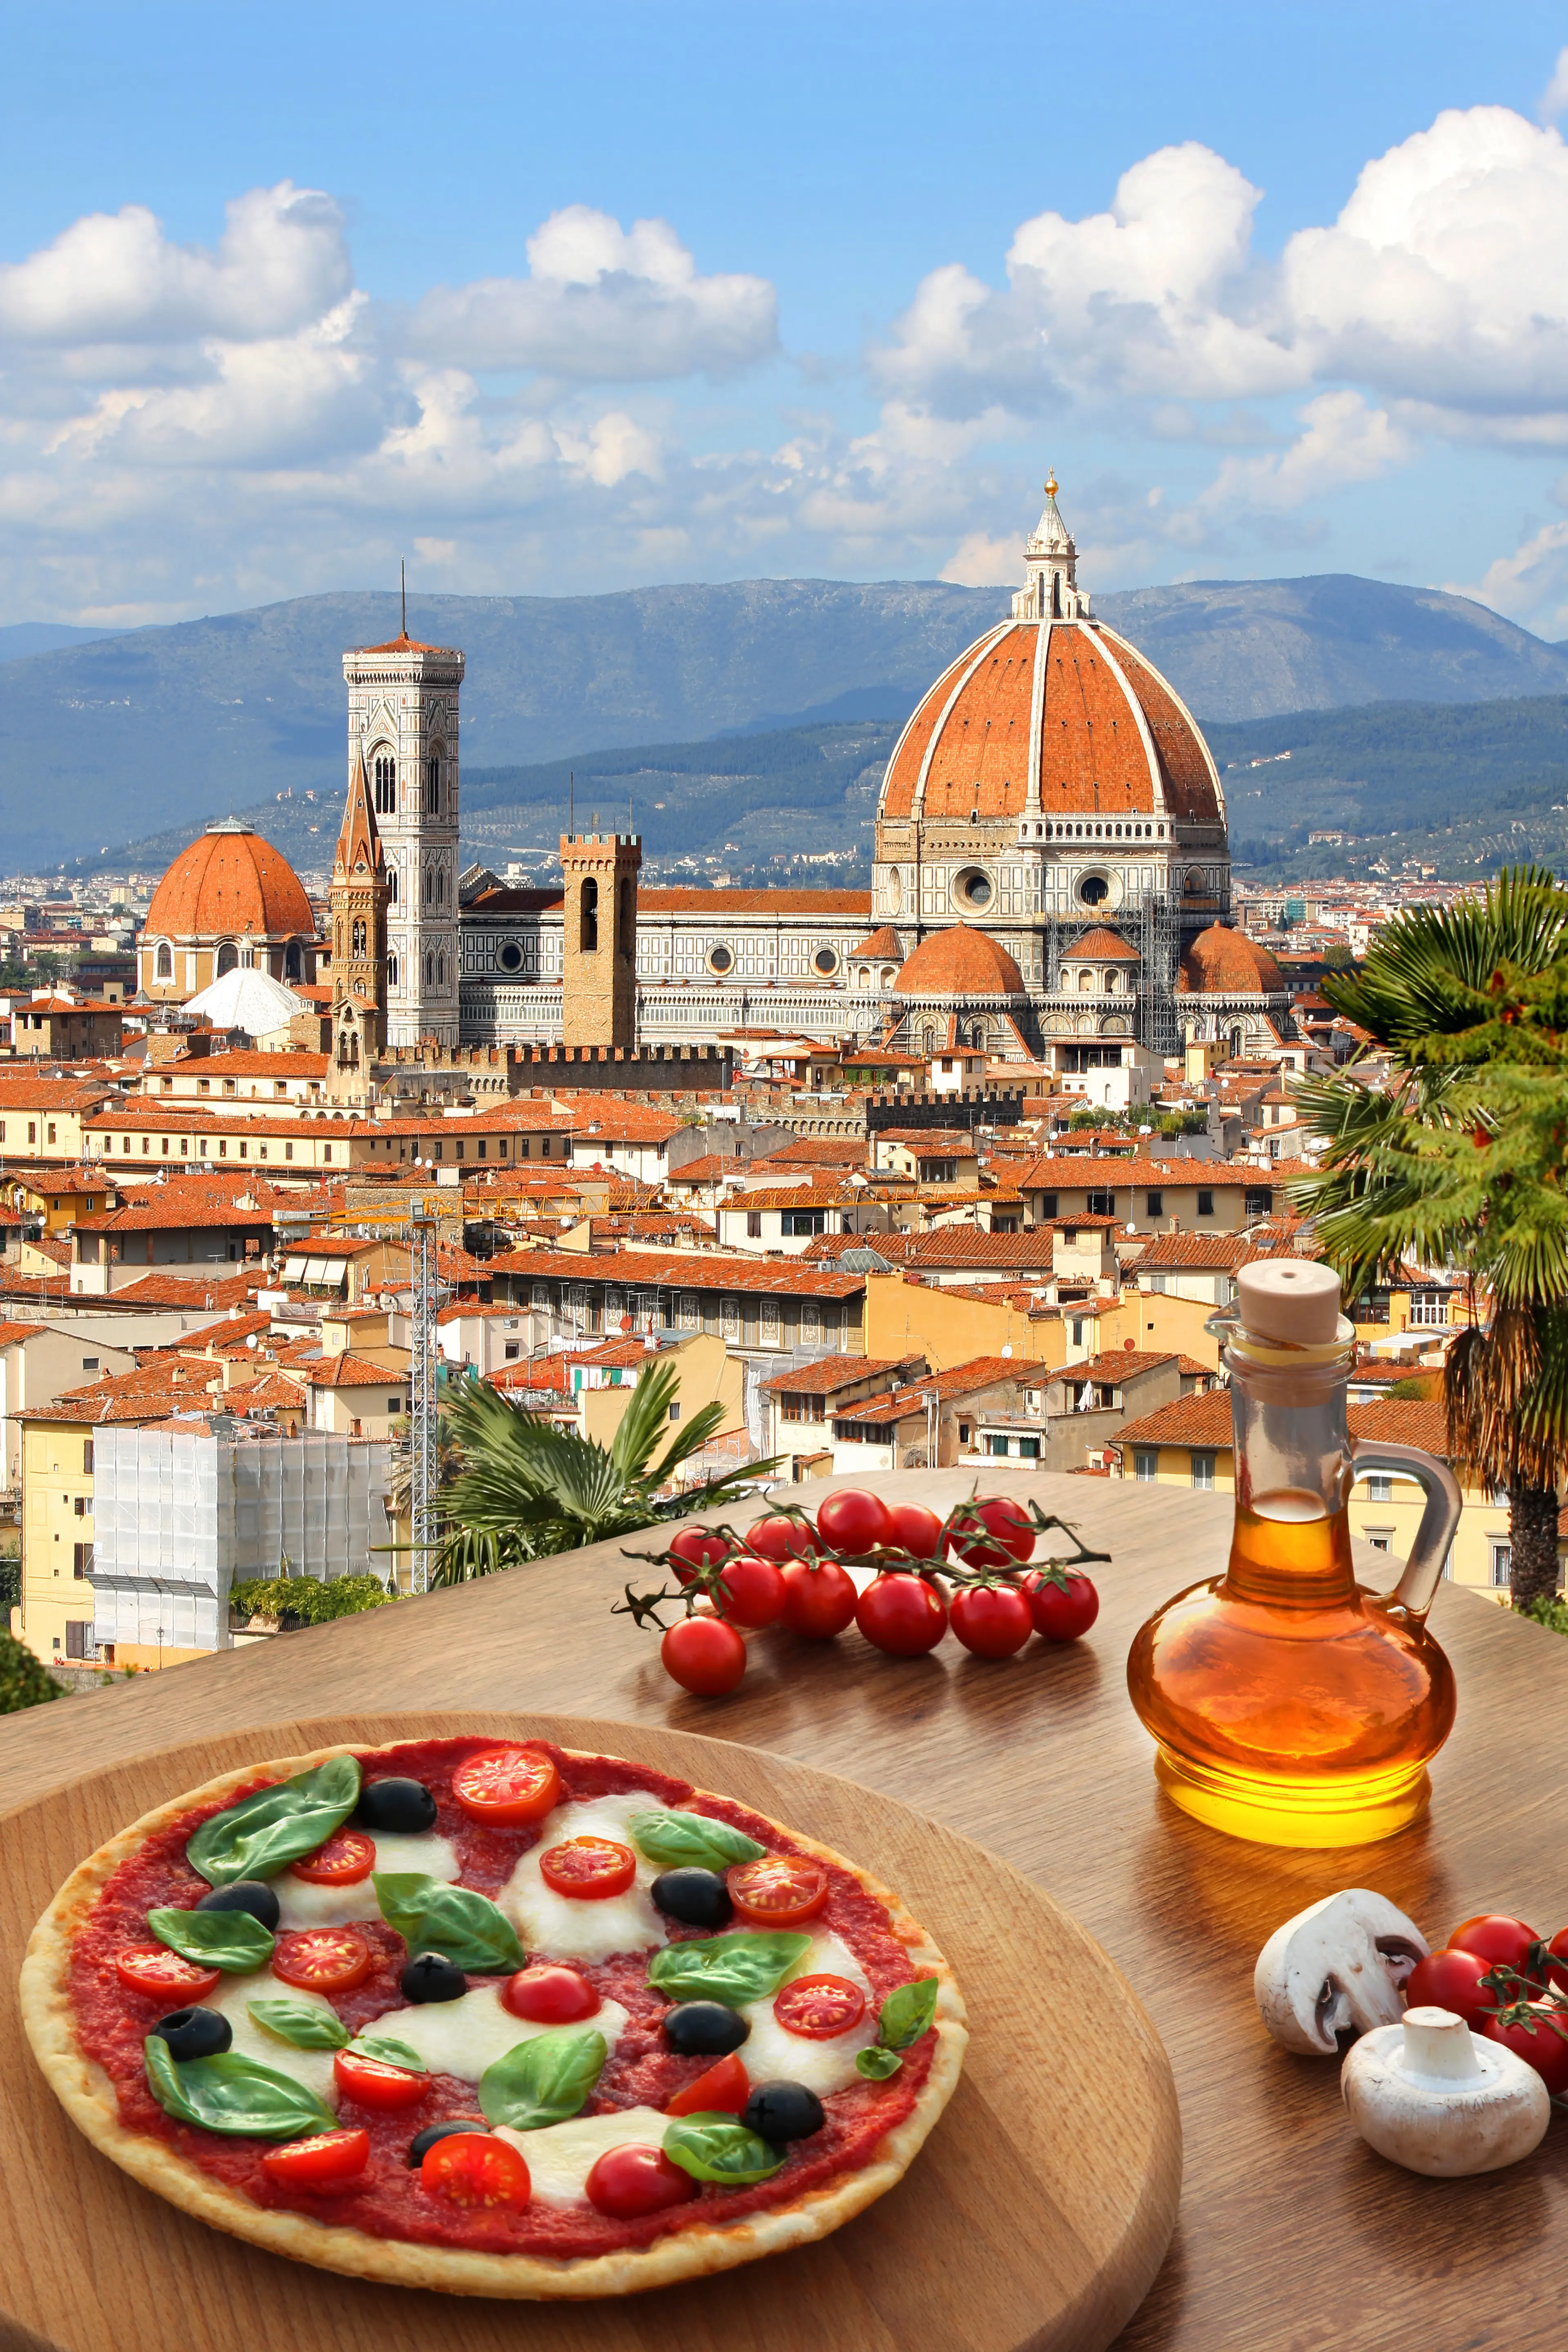 Cathedral and Italian pizza in Tuscany